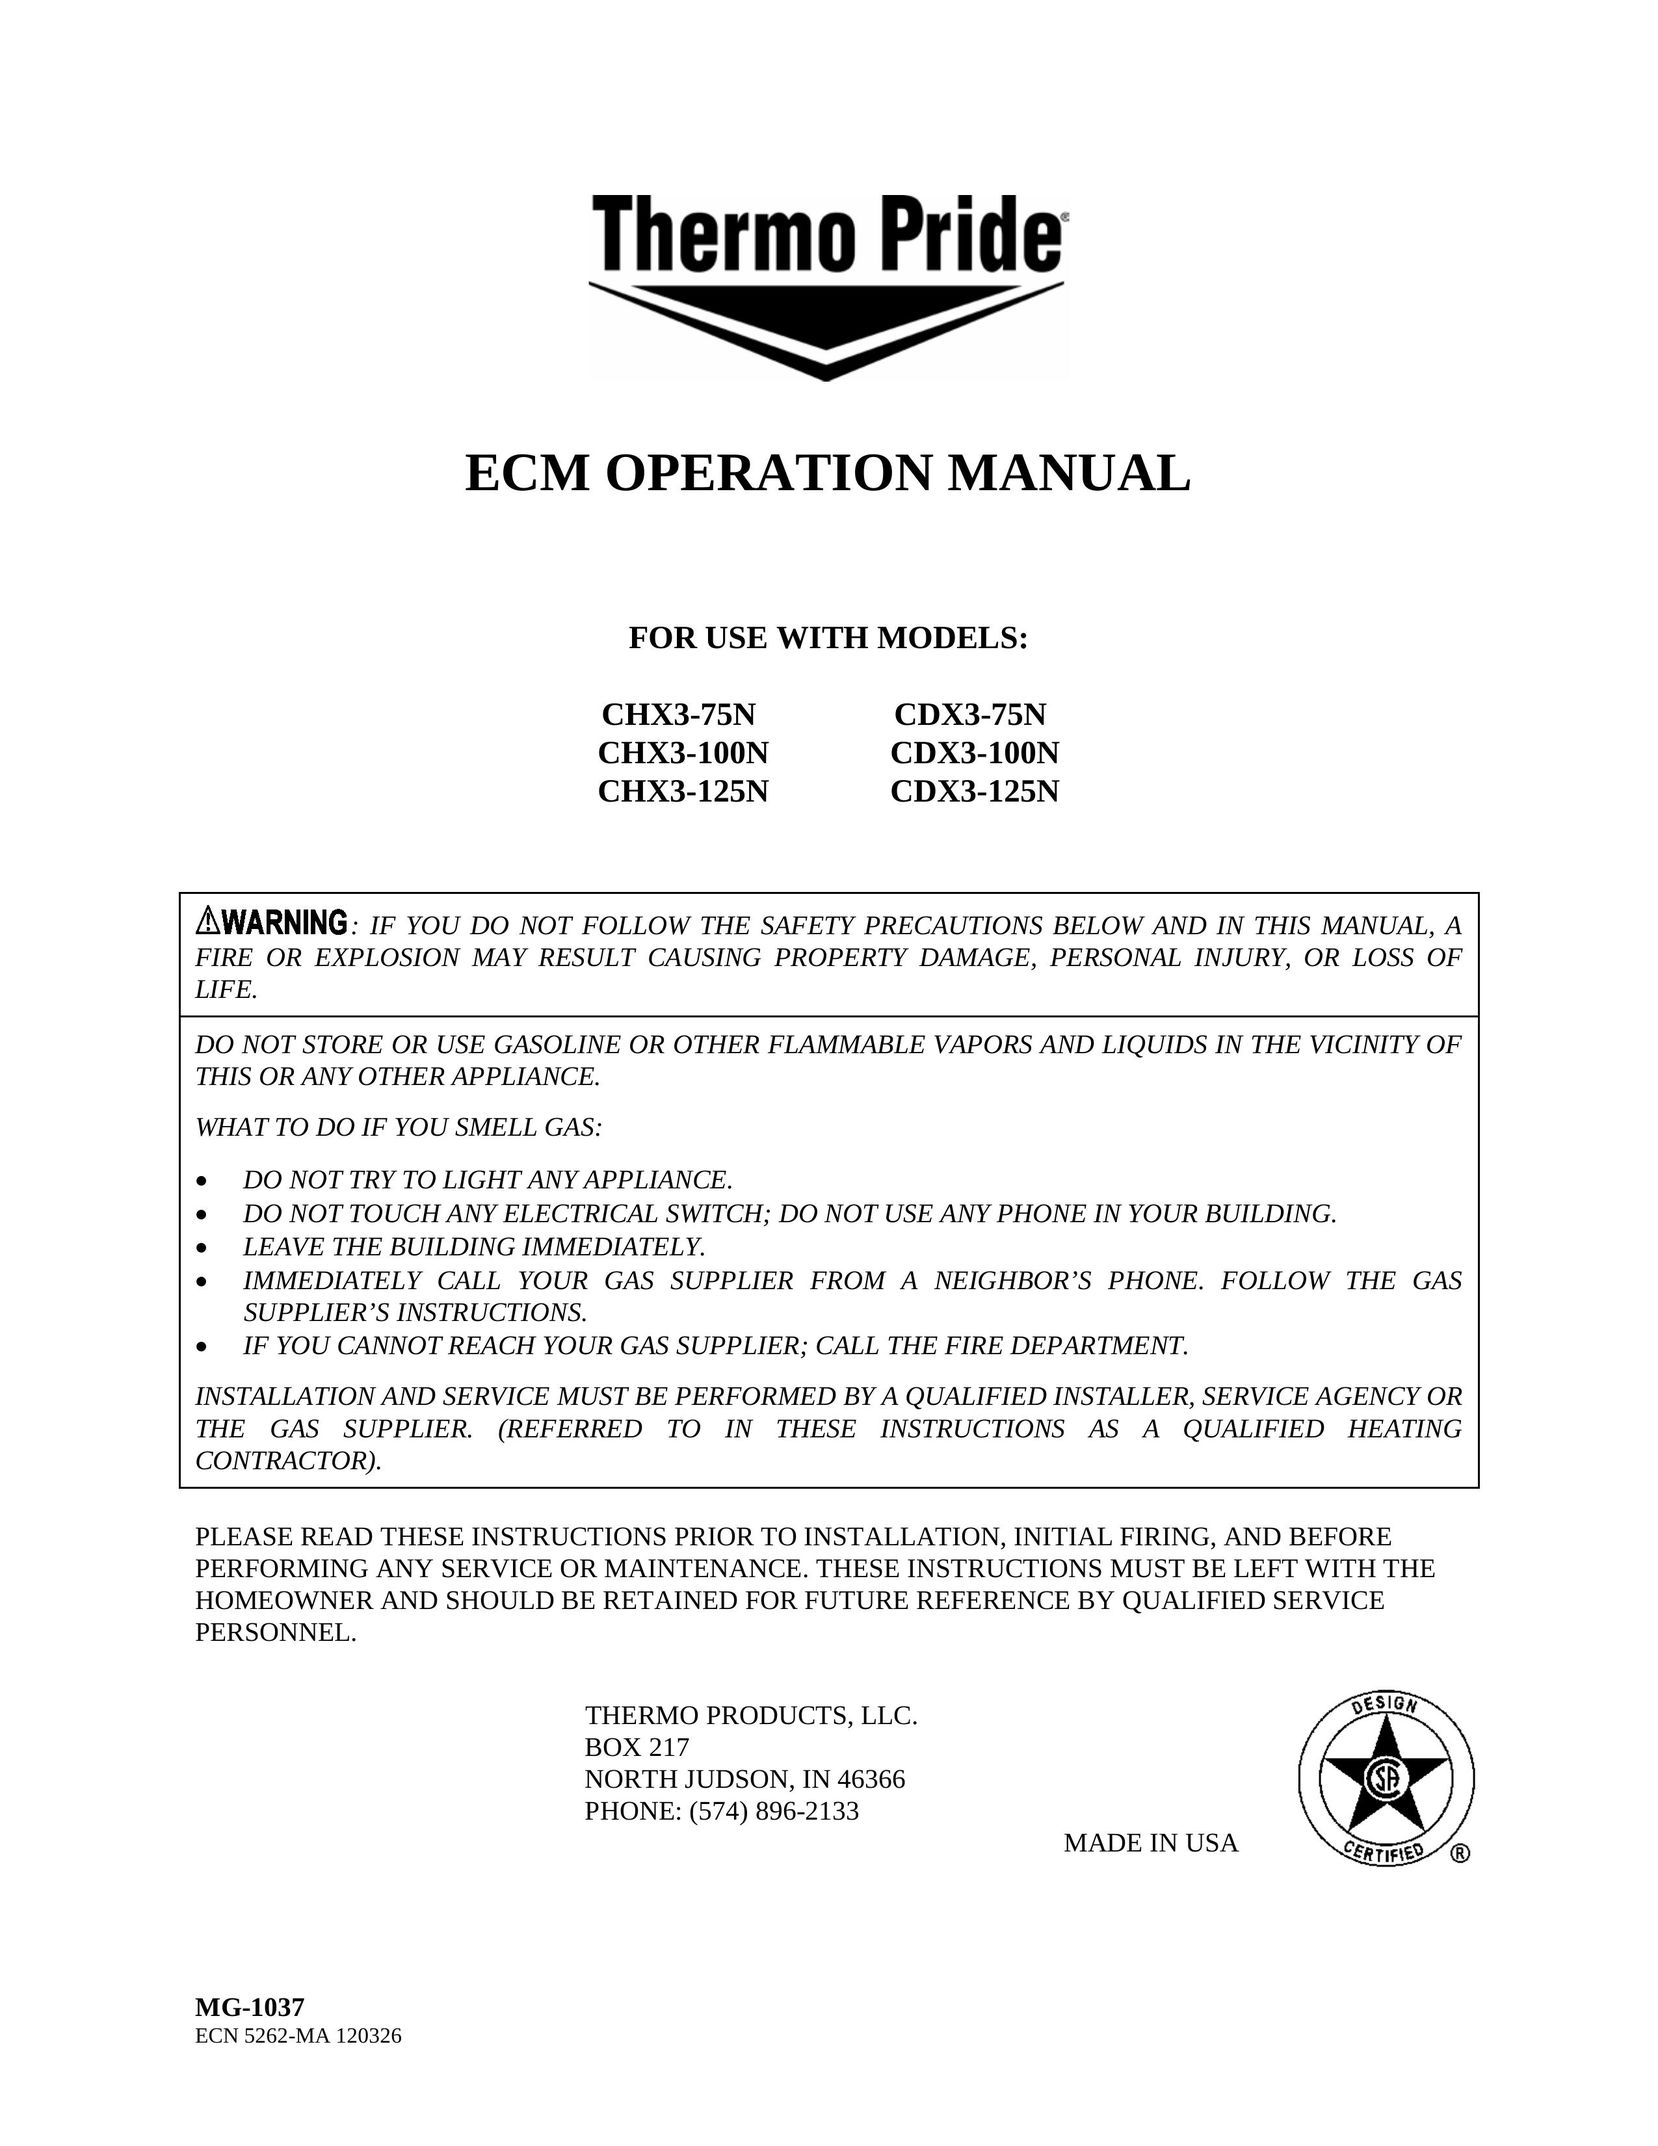 Thermo Products CHX3-125N Furnace User Manual